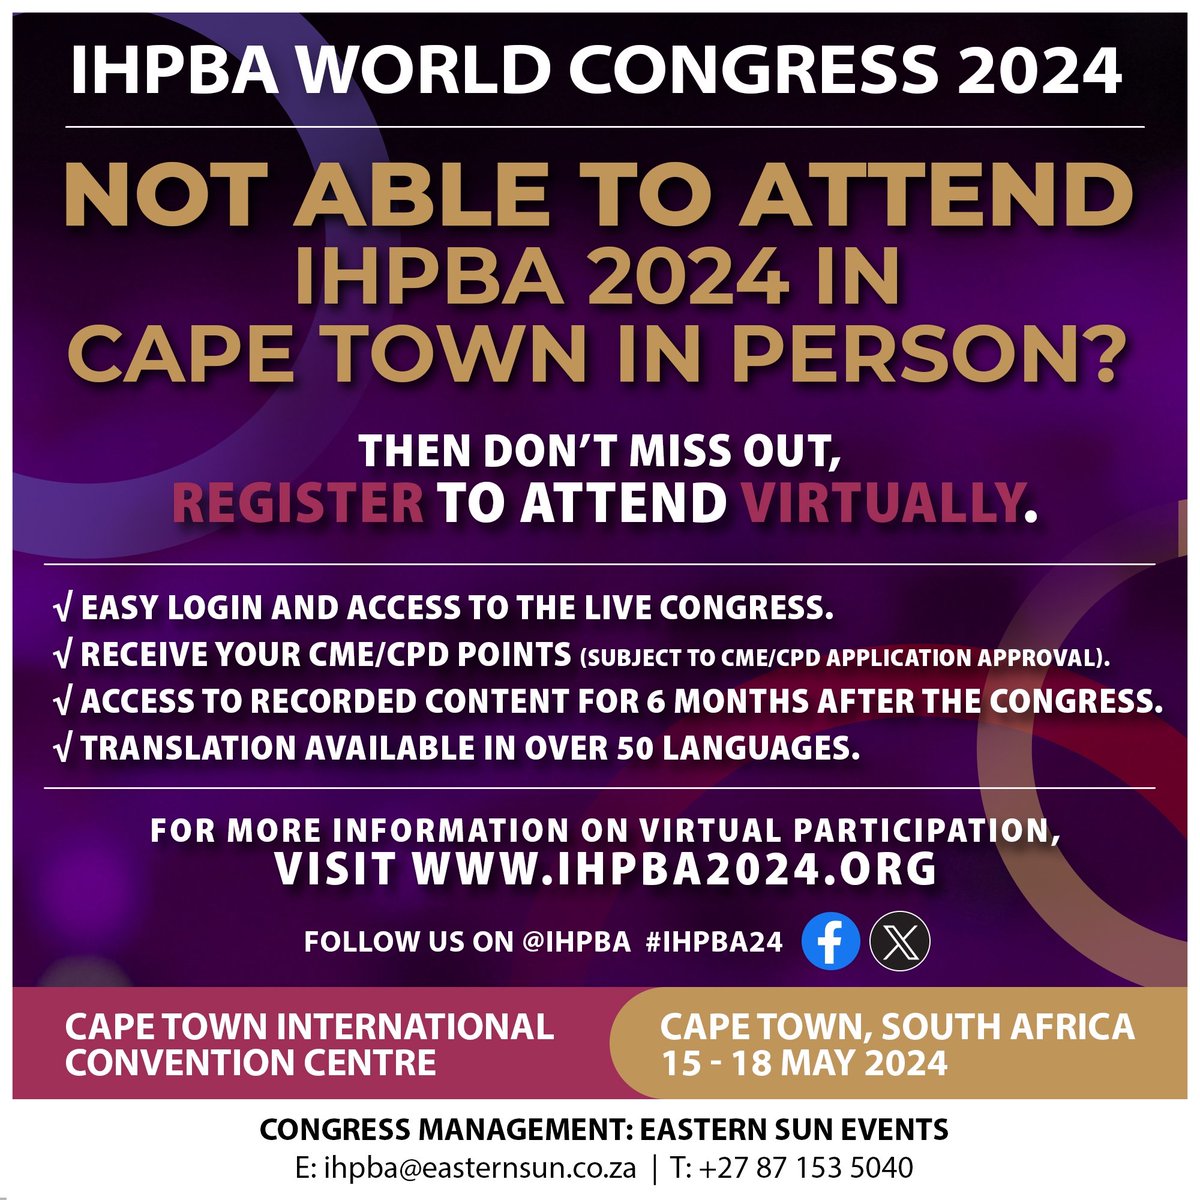 Can't make it to Cape Town, but don't want to miss out? Join us virtually! All sessions recorded and CPD points available! ihpba2024.org/online-registr… @IHPBA